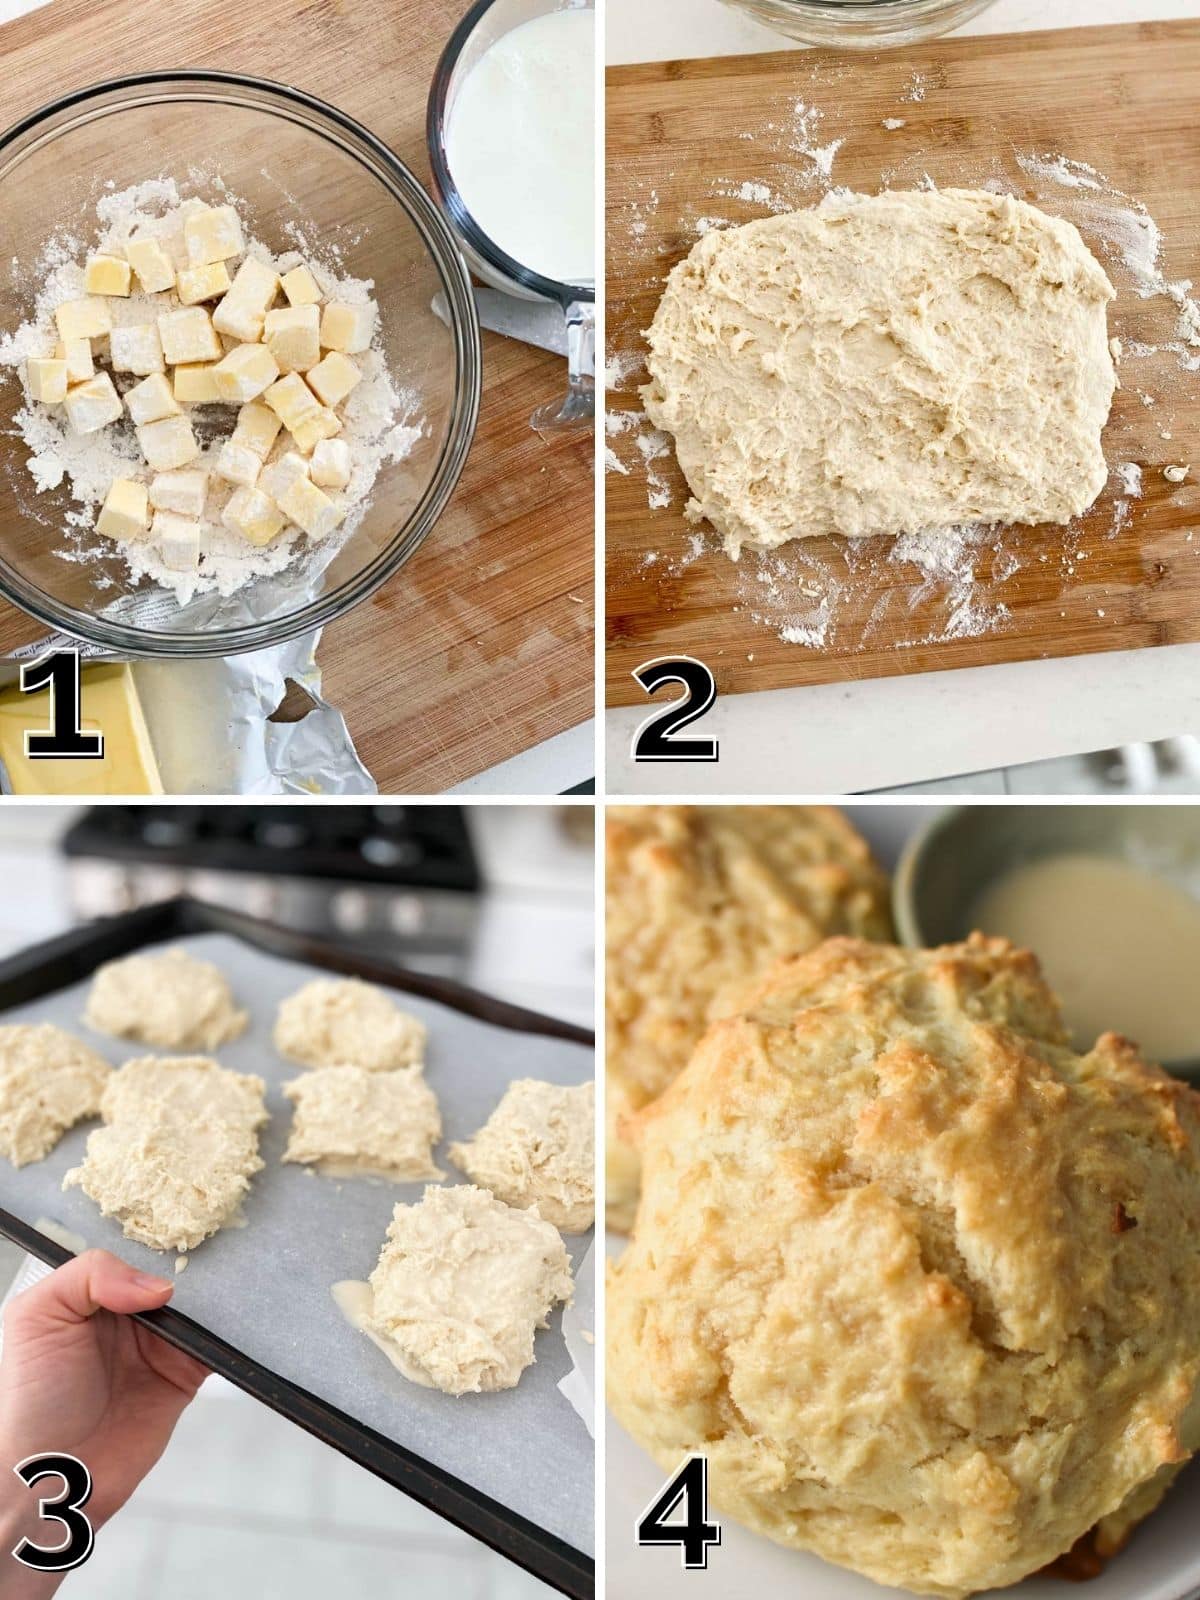 Step by step pictures showing cold butter into dough, forming dough into biscuits, dropping biscuits on to a tray and baking.